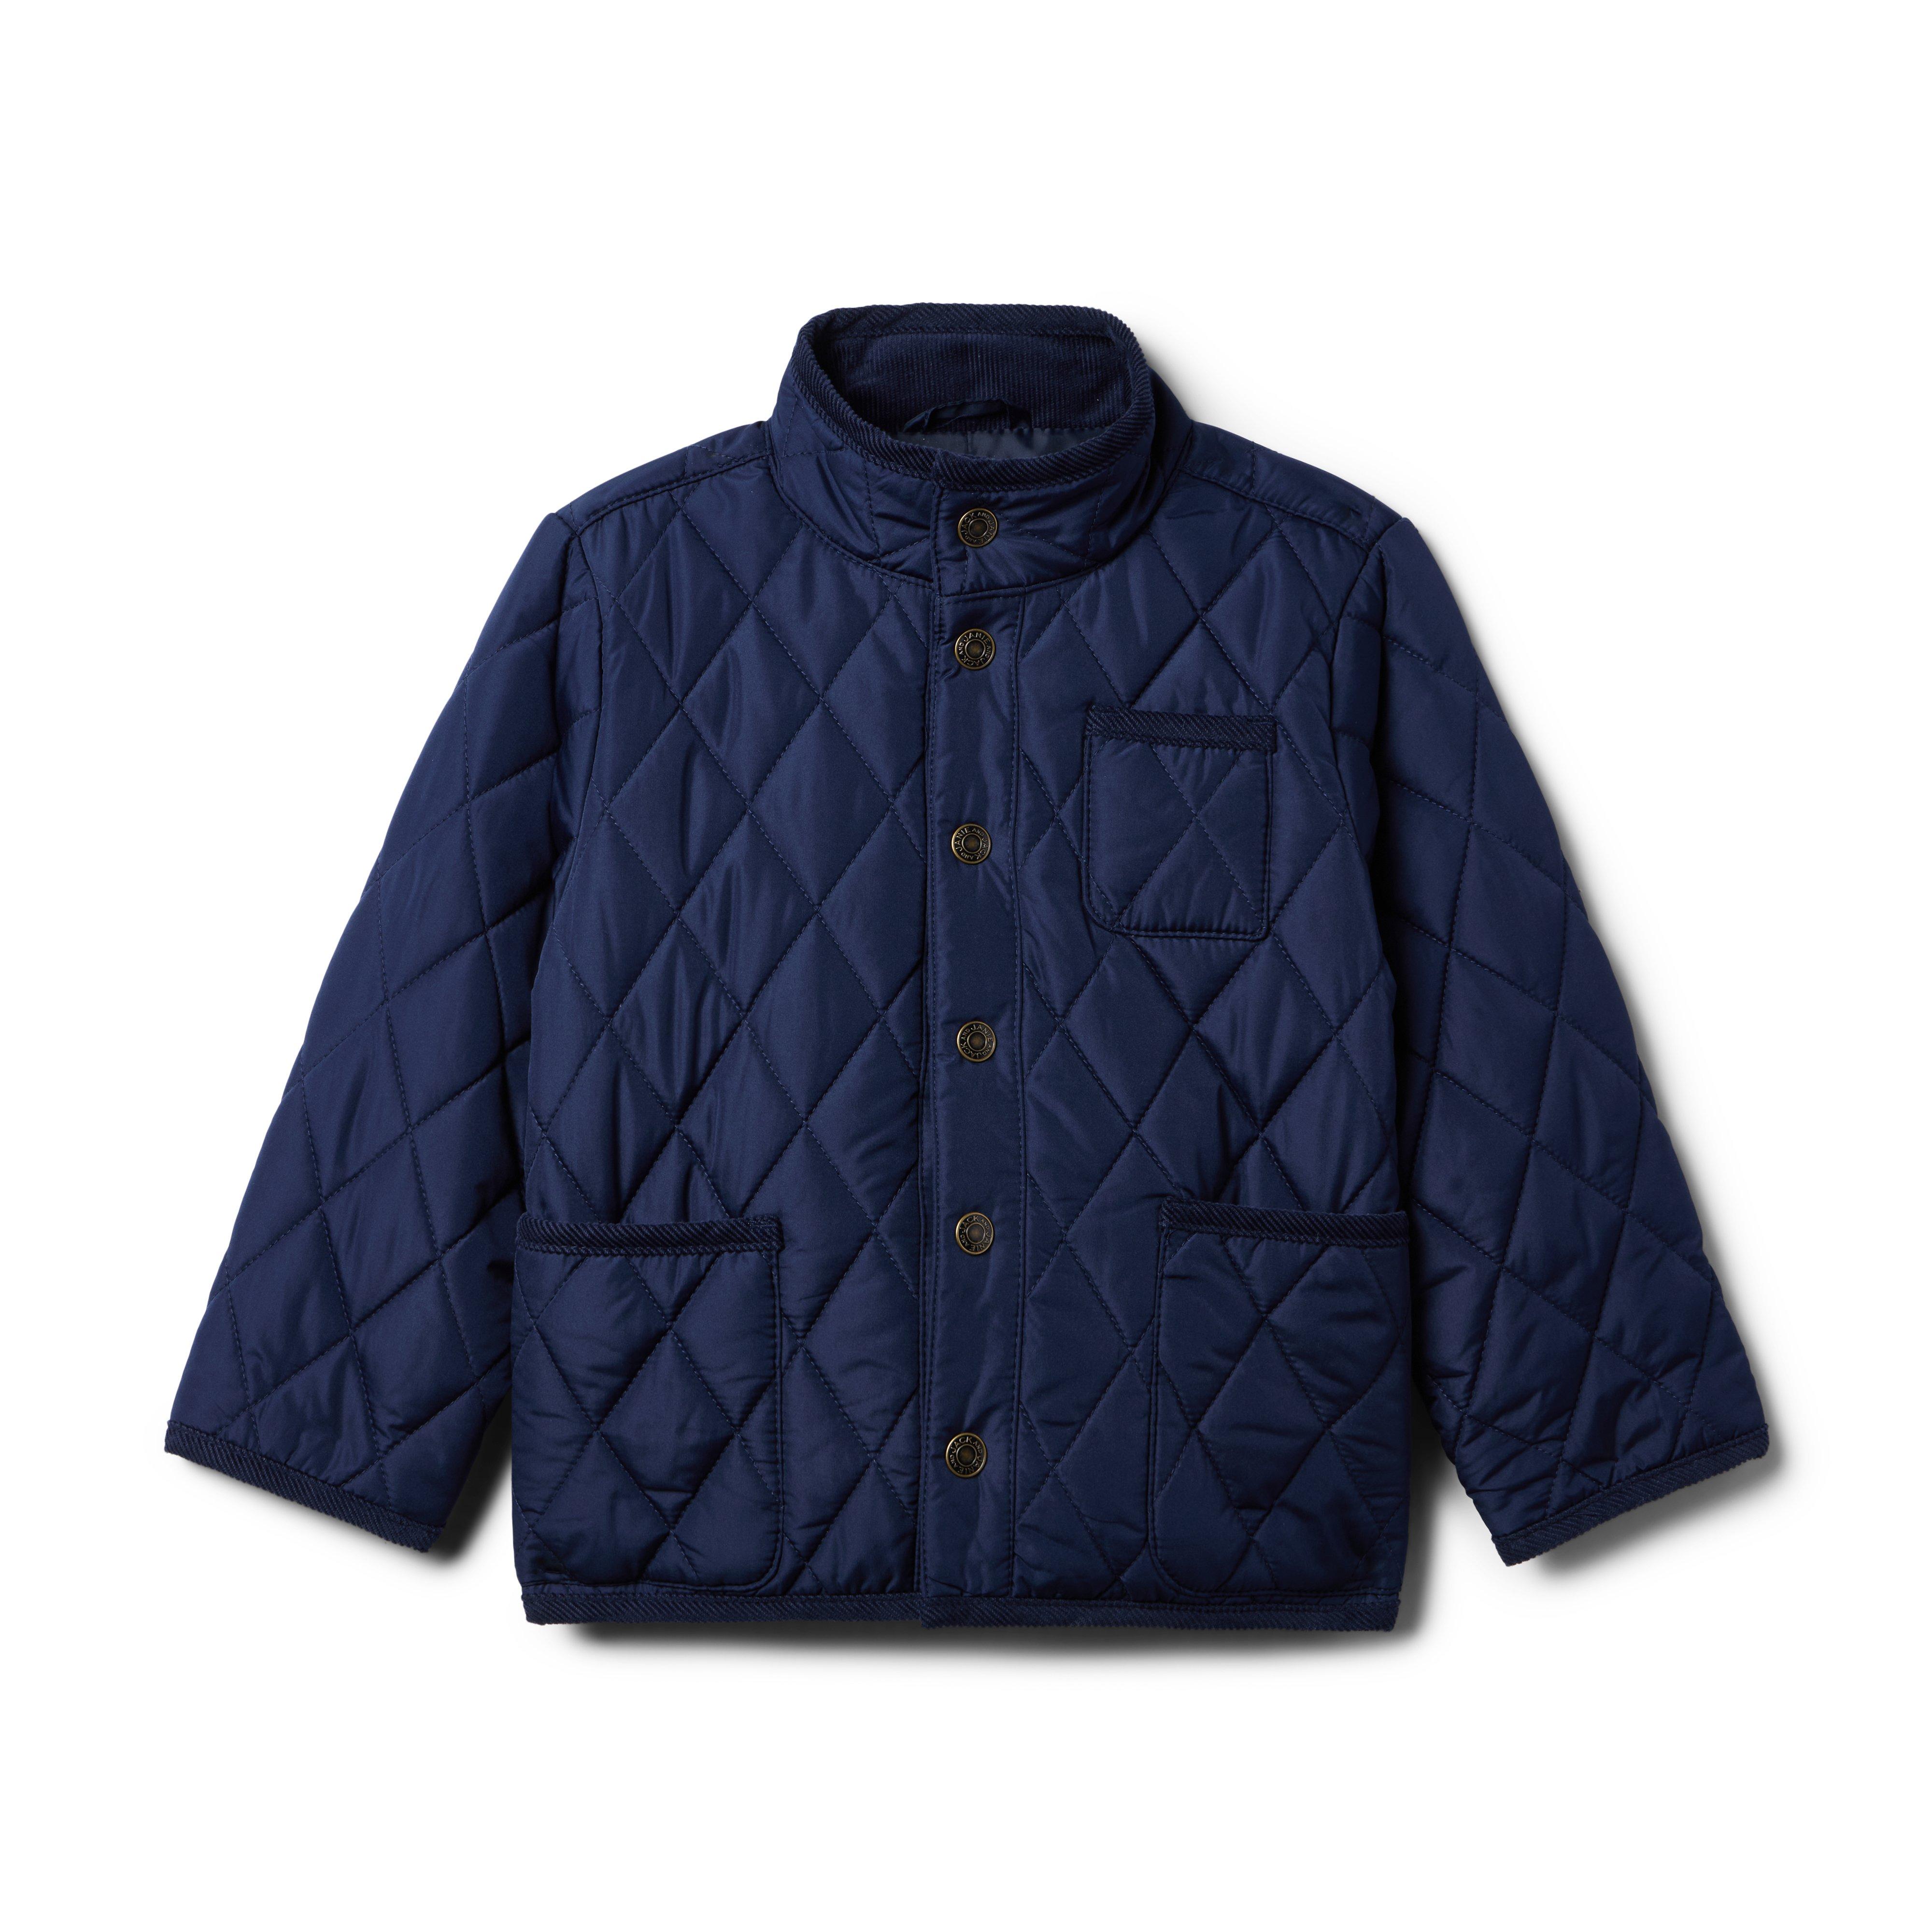 The Quilted Field Jacket